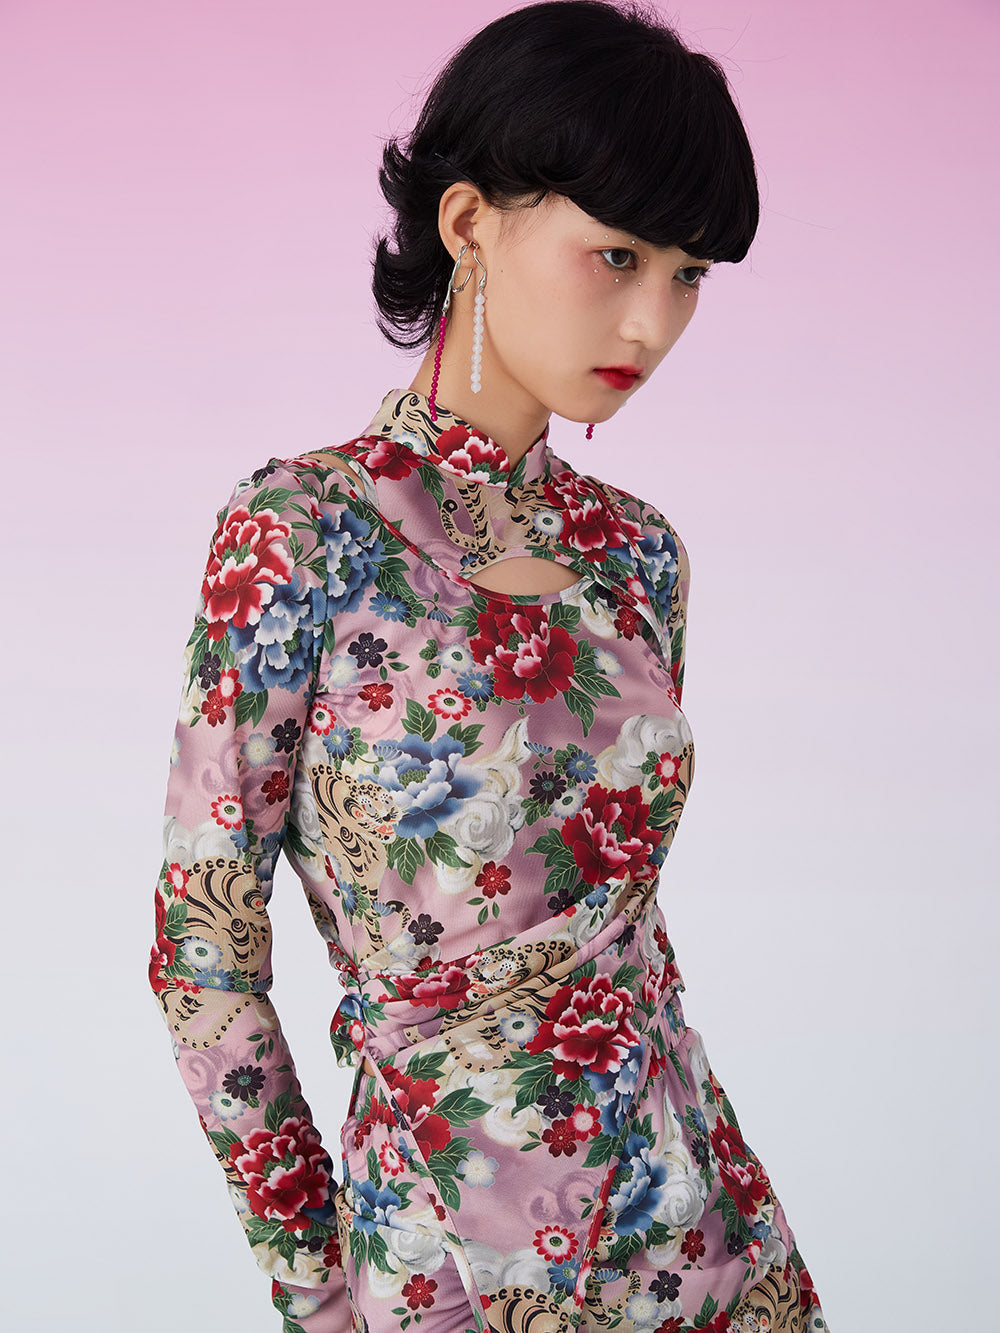 MUKZIN Retro Floral Ruched Bottom Shirt CNY “year of the tiger” Edition